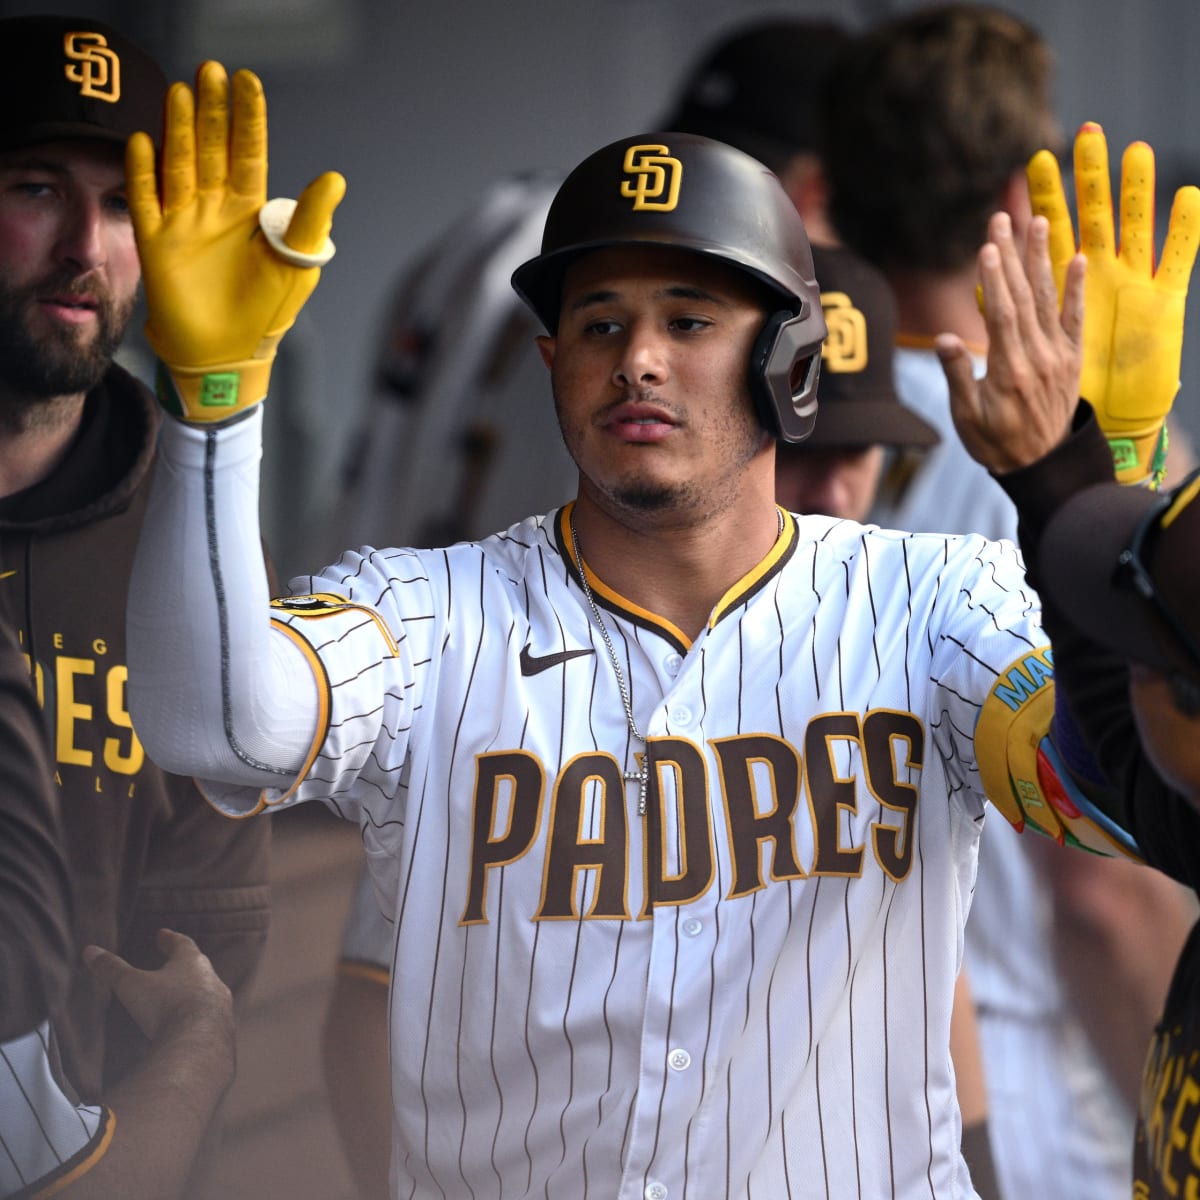 san diego padres yellow jersey